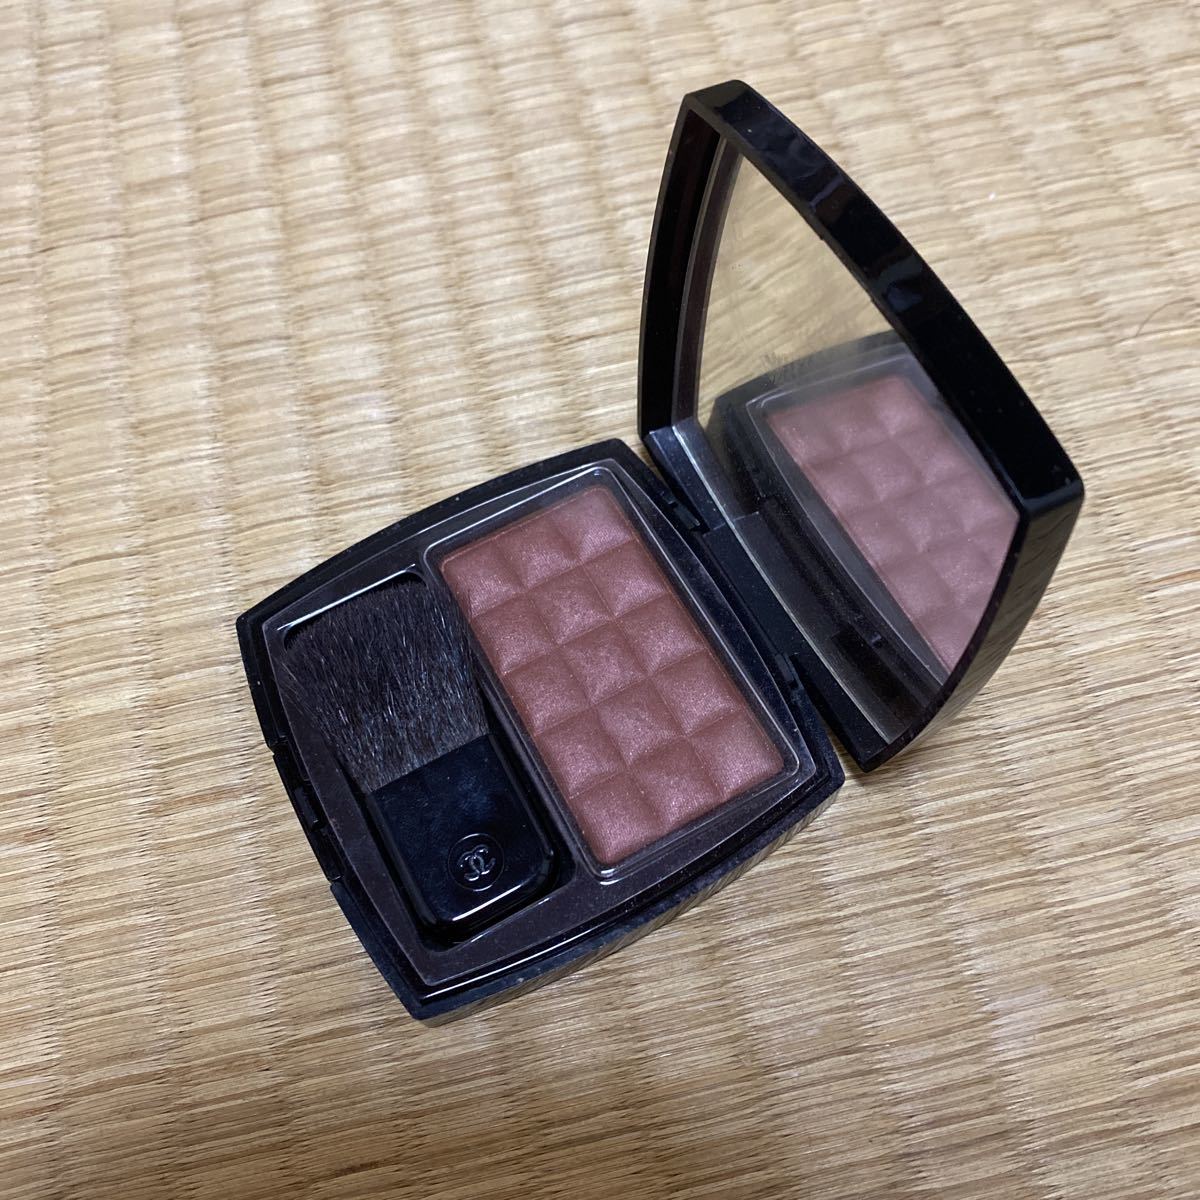  Chanel brush face powder face color 40 mystery MYSTERY CHANEL cosme cosmetics 